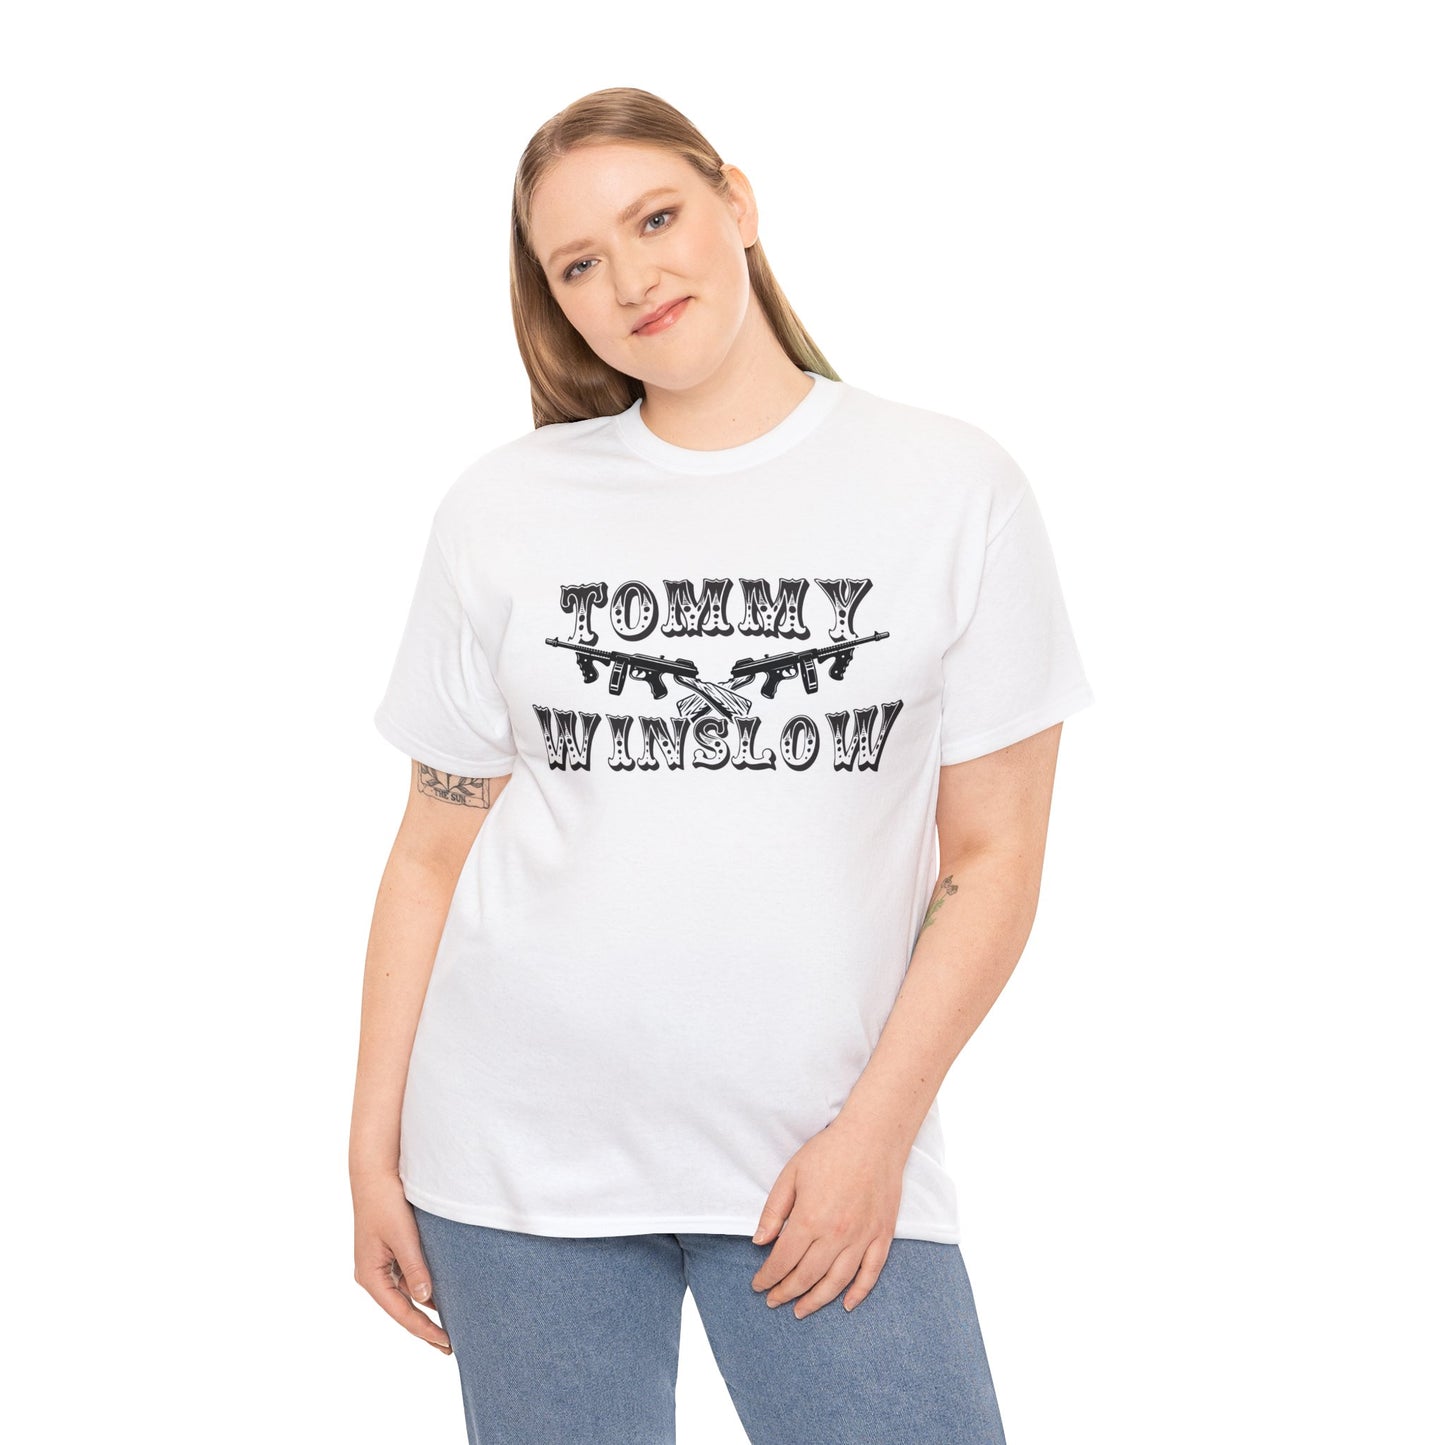 Tommy "The Gun" Winslow Logo Printed Tee